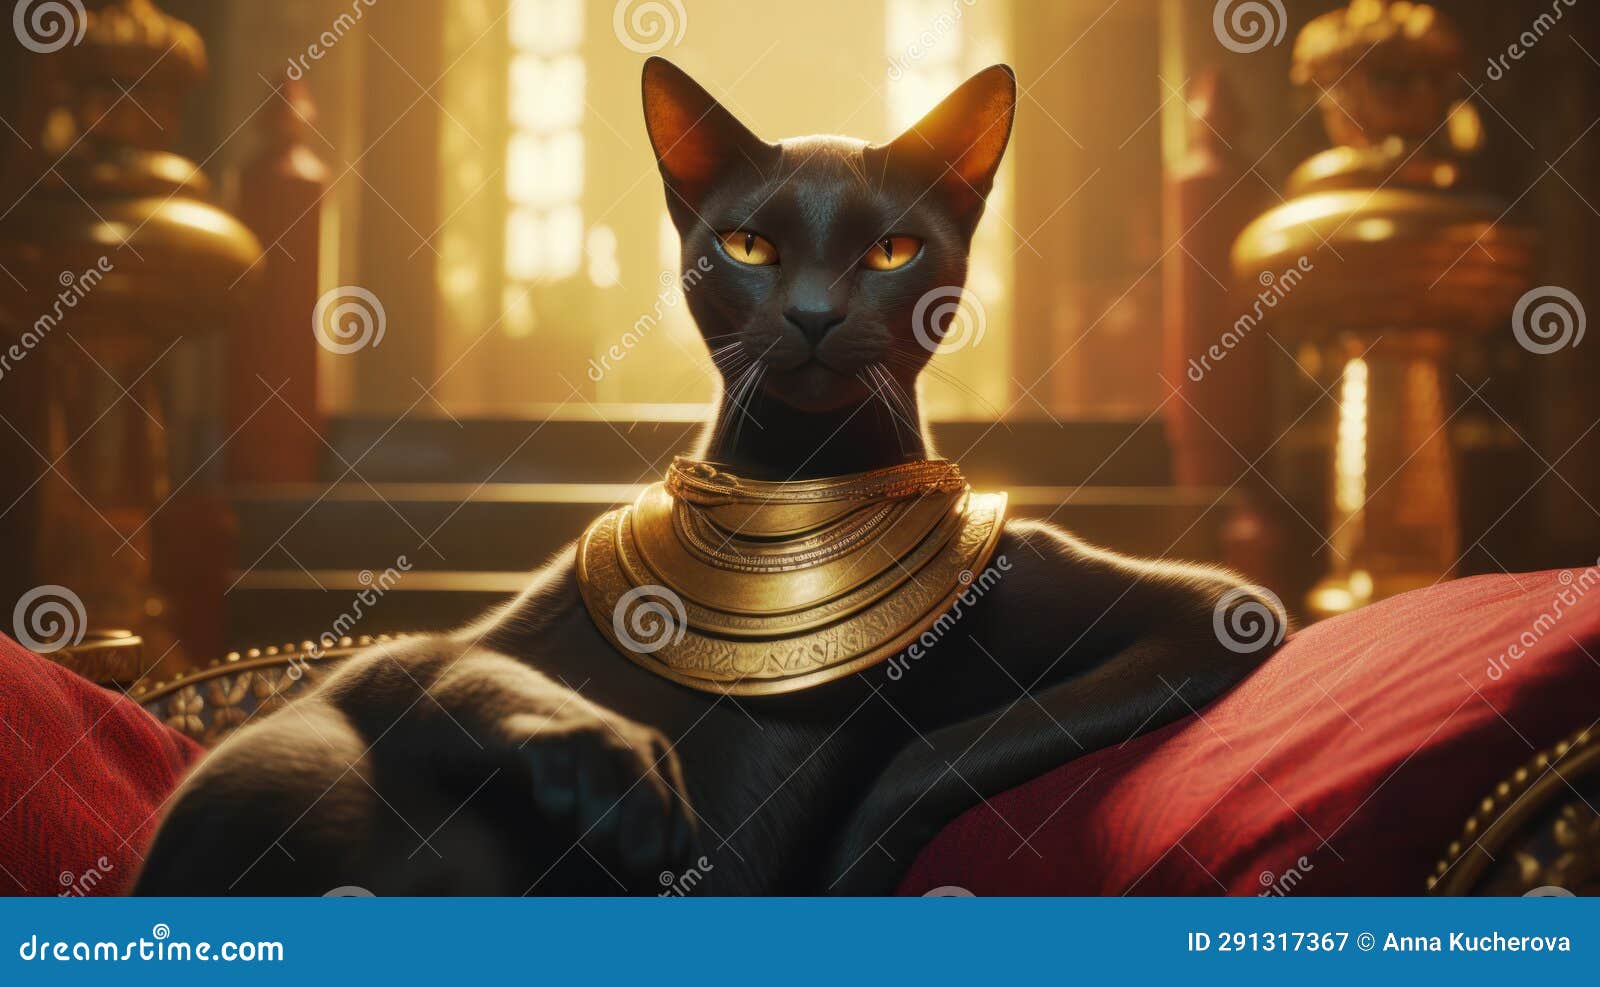 modern interpretation of the ancient egyptian cat goddess bastet, known for home protection and blessings. generative ai